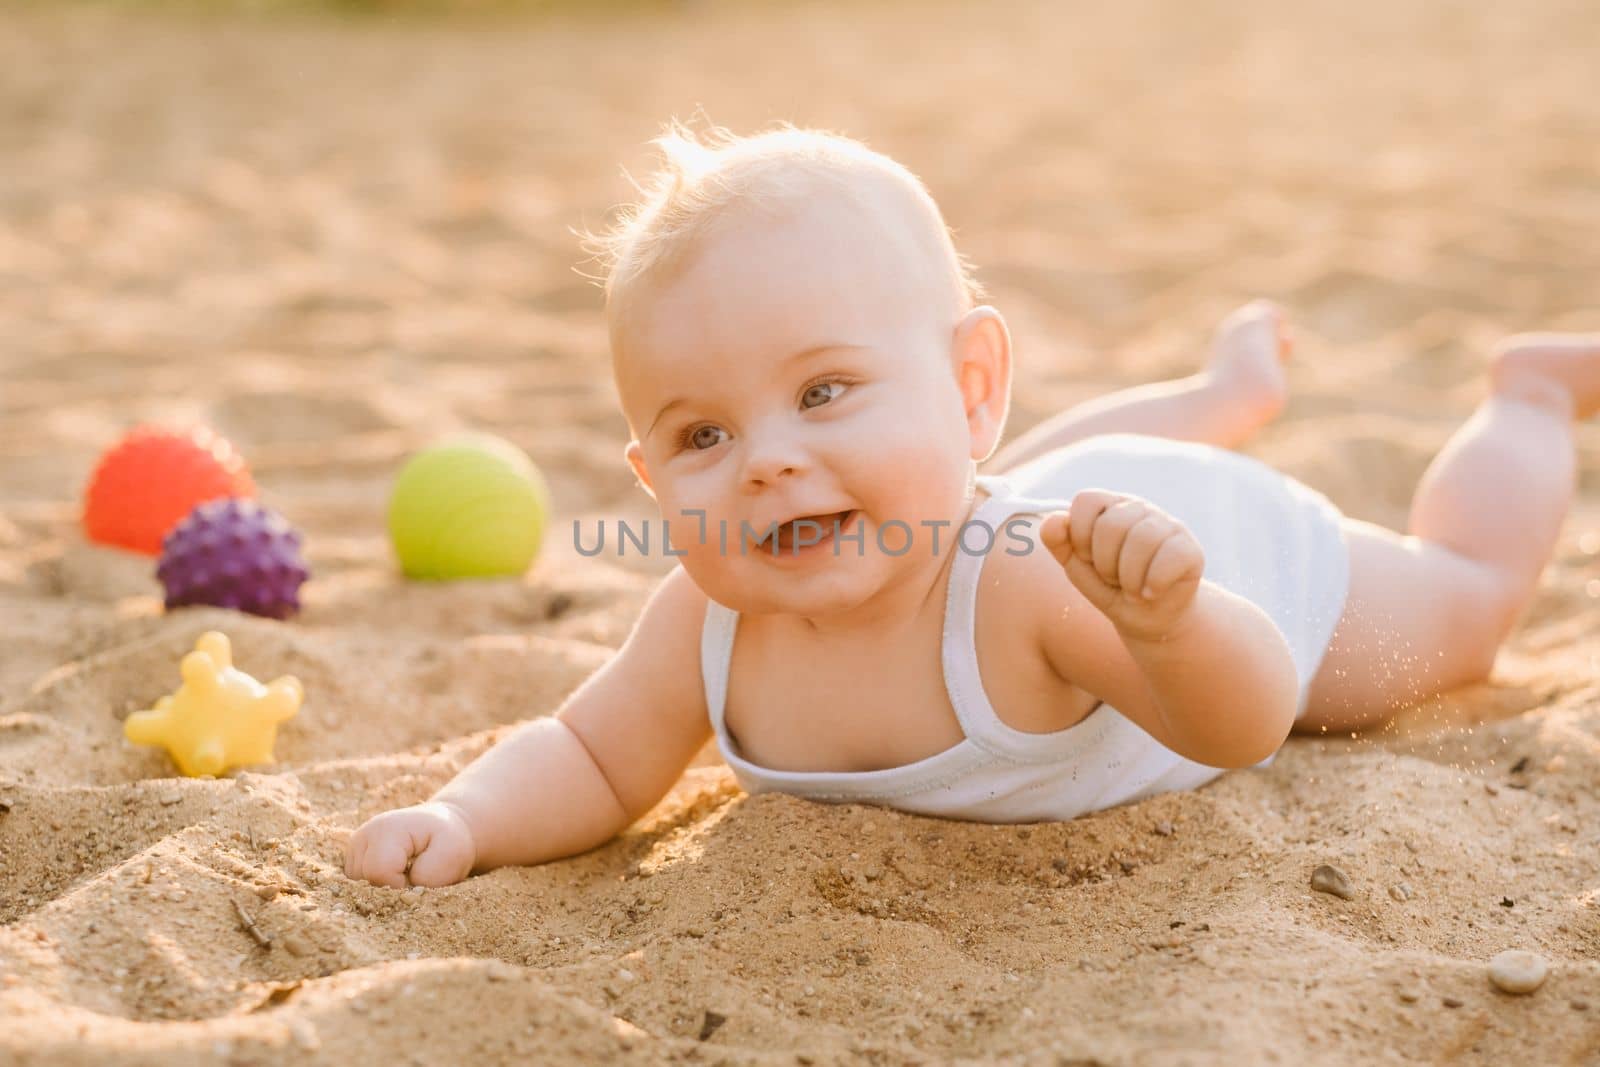 A happy little boy is lying on a sandy beach near the sea in the rays of the setting sun.